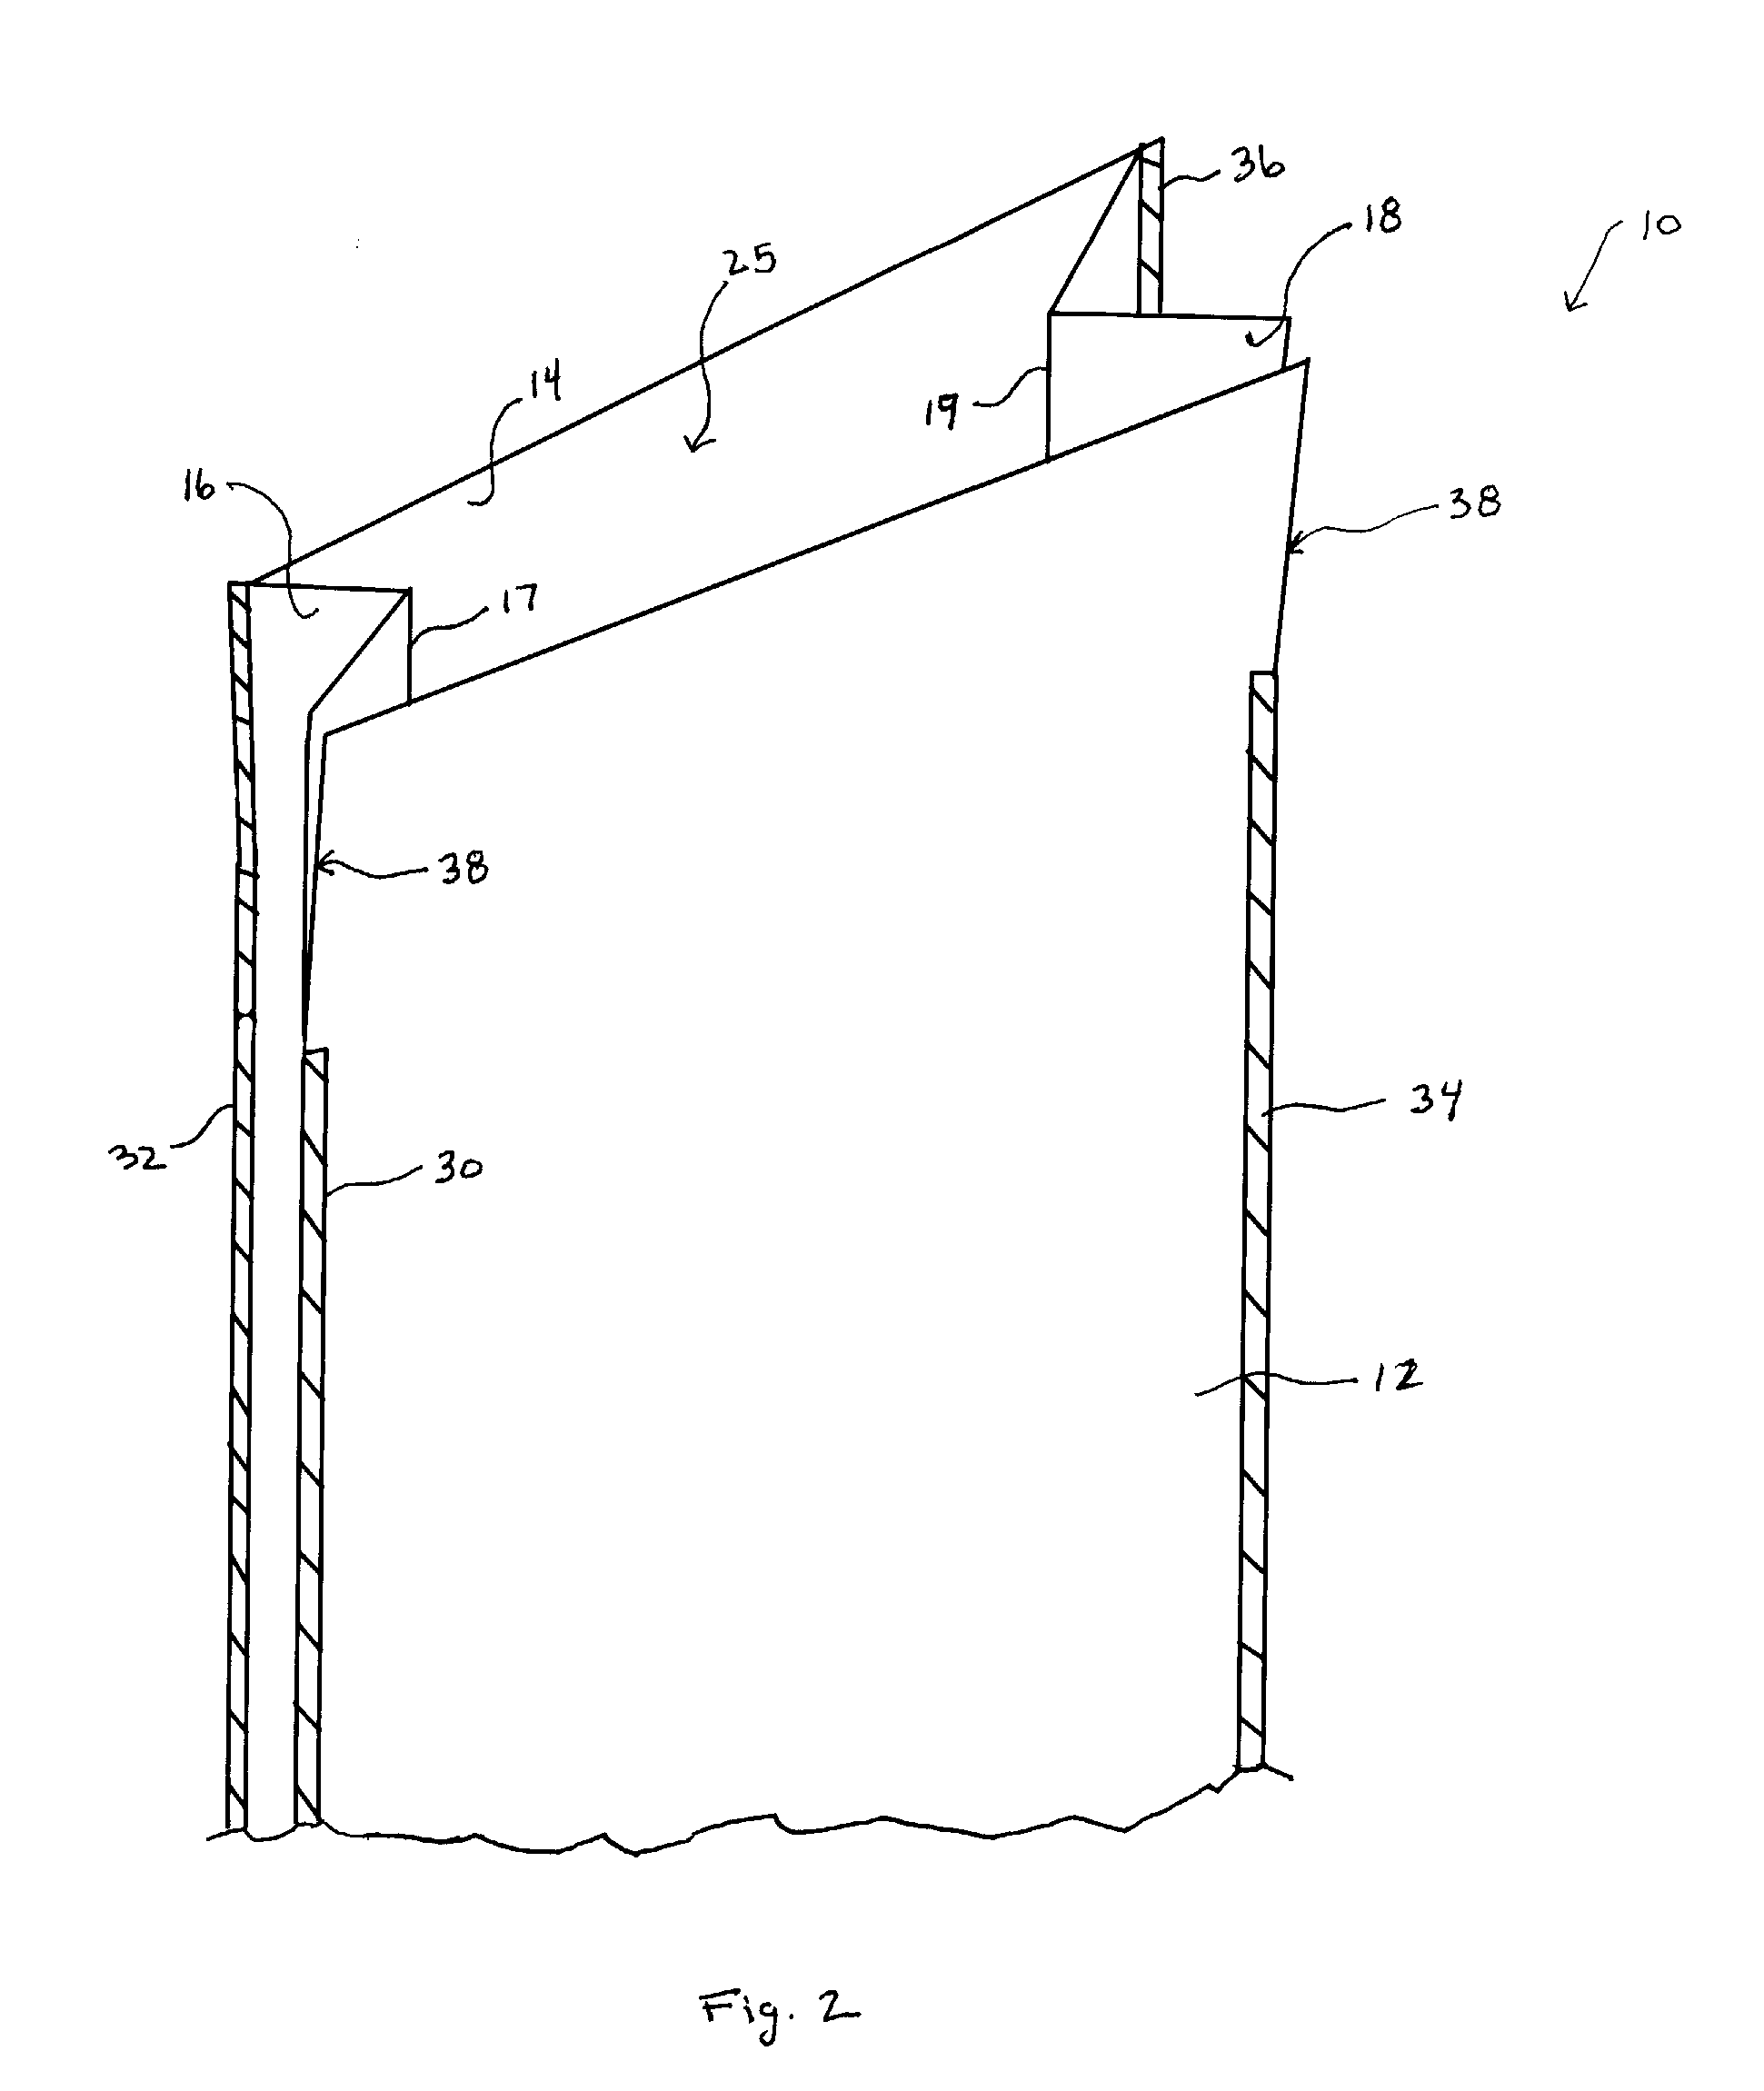 Gusseted package with impact barrier